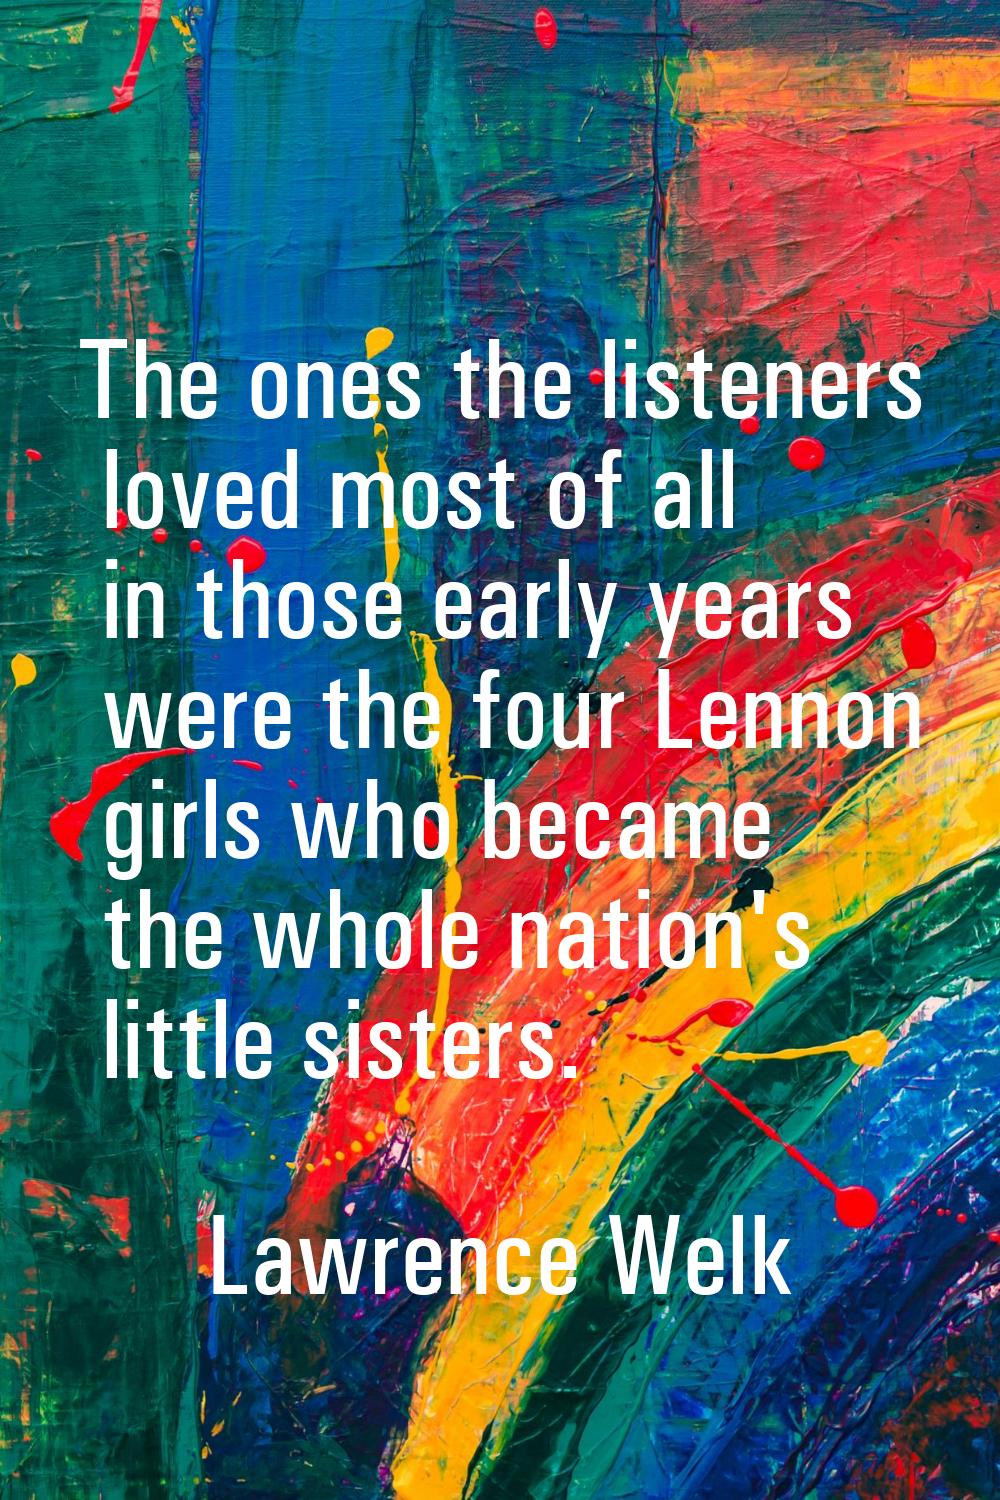 The ones the listeners loved most of all in those early years were the four Lennon girls who became